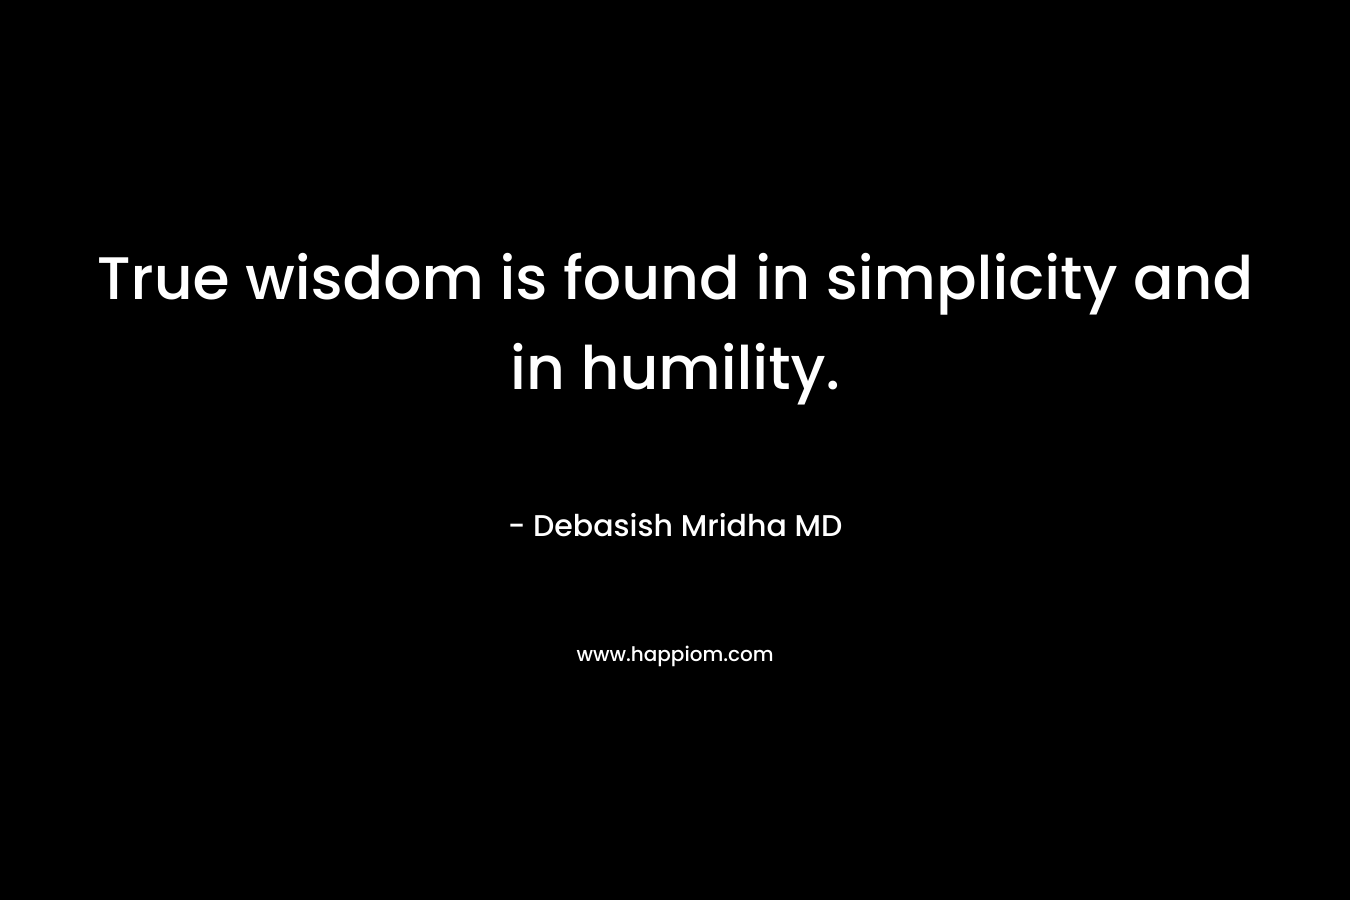 True wisdom is found in simplicity and in humility.